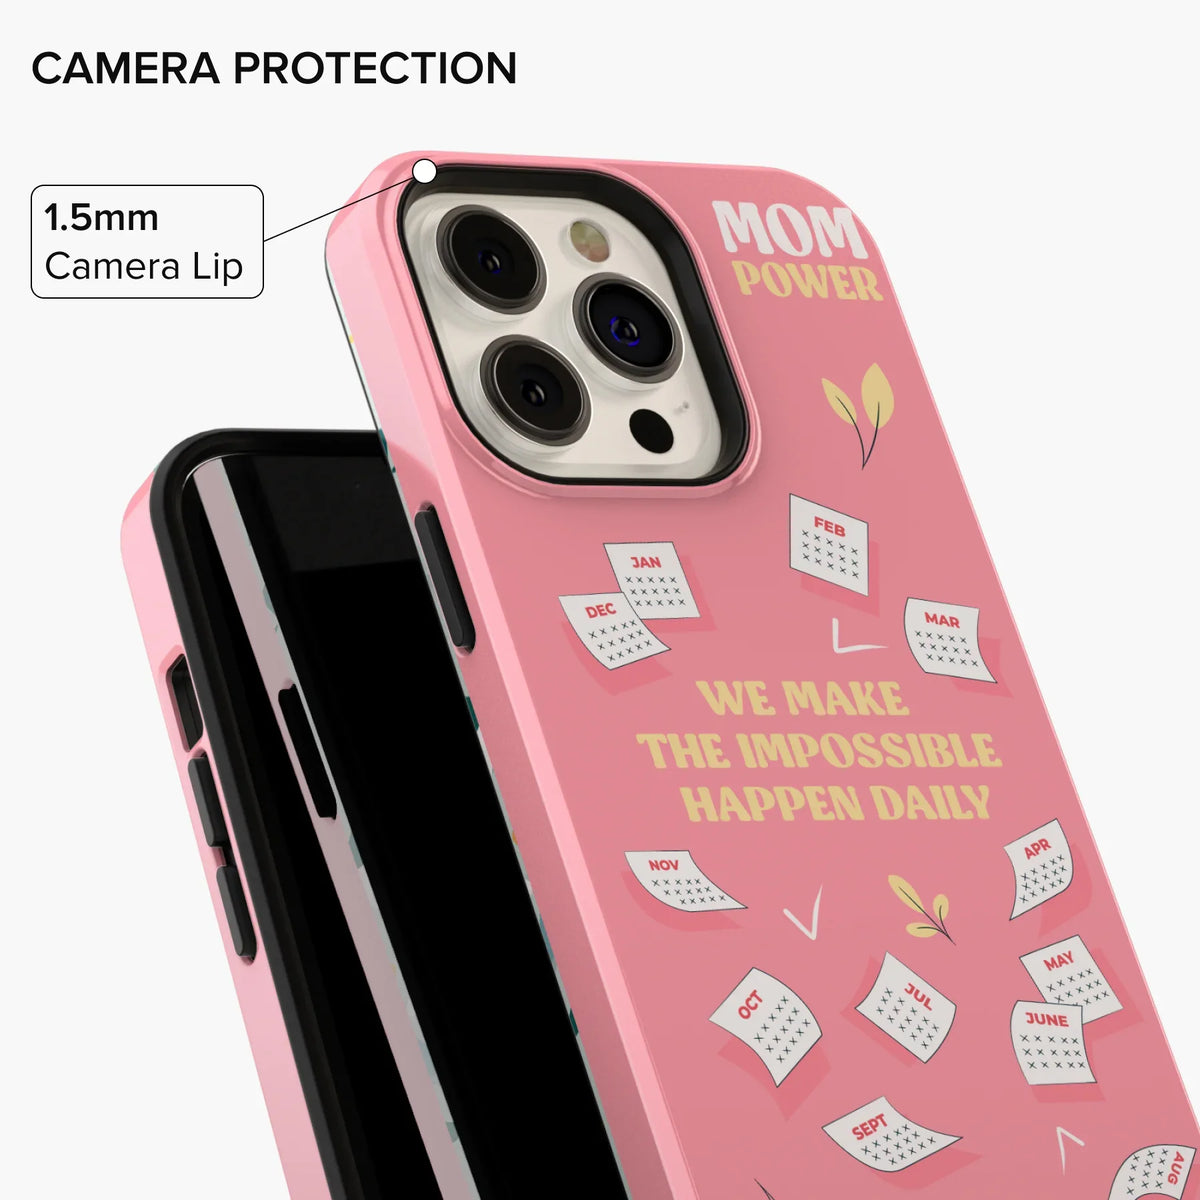 Mom Power iPhone Case - Select a Device